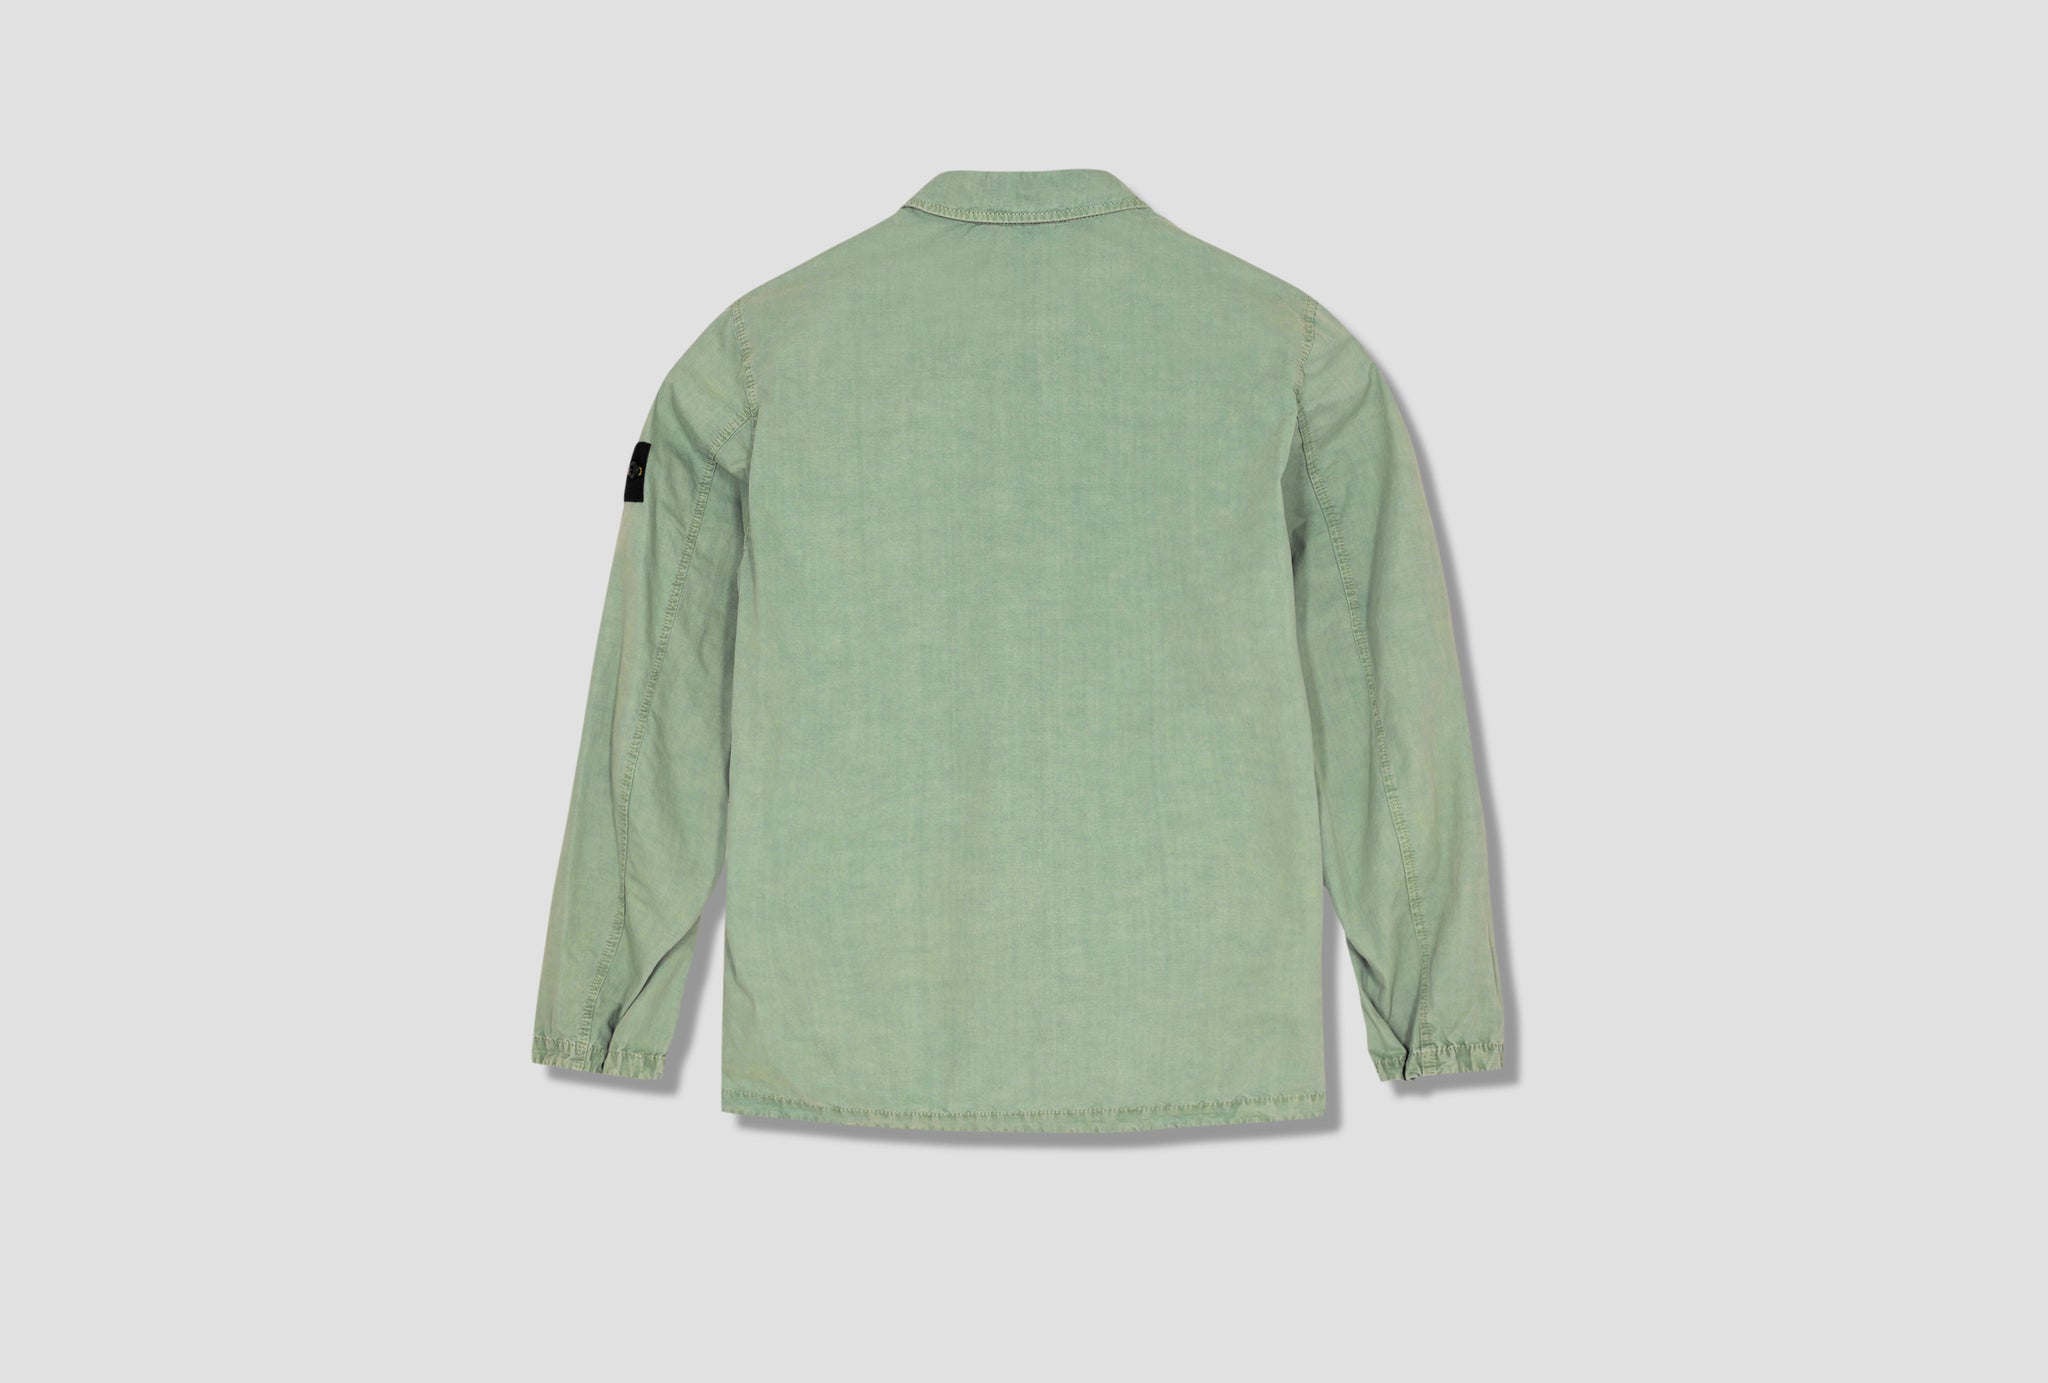 BRUSHED COTTON CANVAS GARMENT DYED 'OLD' EFFECT 7715101WN Green